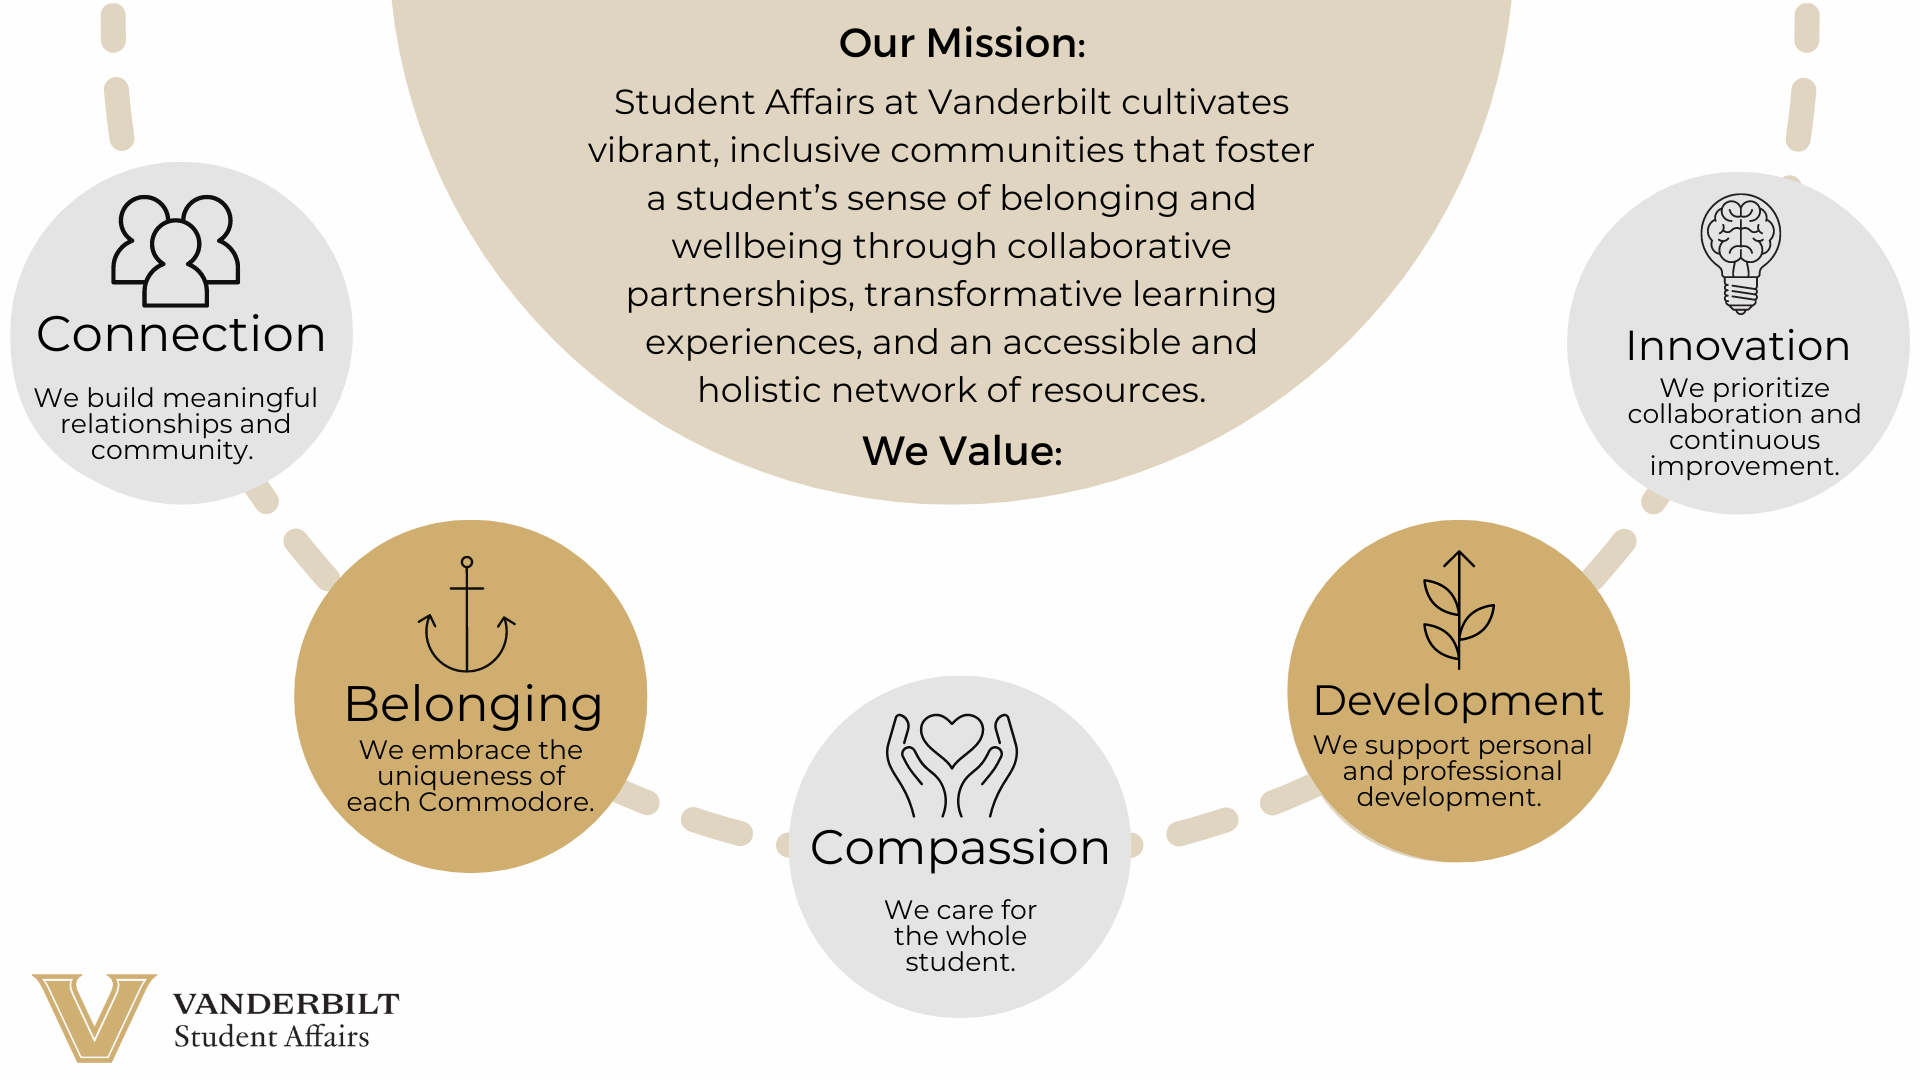 Student Affairs at Vanderbilt cultivates vibrant, inclusive communities that foster a student’s sense of belonging and wellbeing through collaborative partnerships, transformative learning experiences, and an accessible and holistic network of resources. We value: Connection - We build meaningful relationships and community. Belonging - We embrace the uniqueness of each Commodore. Compassion - We care for the whole student. Development - We support personal and professional development. and Innovation - We prioritize collaboration and continuous improvement.